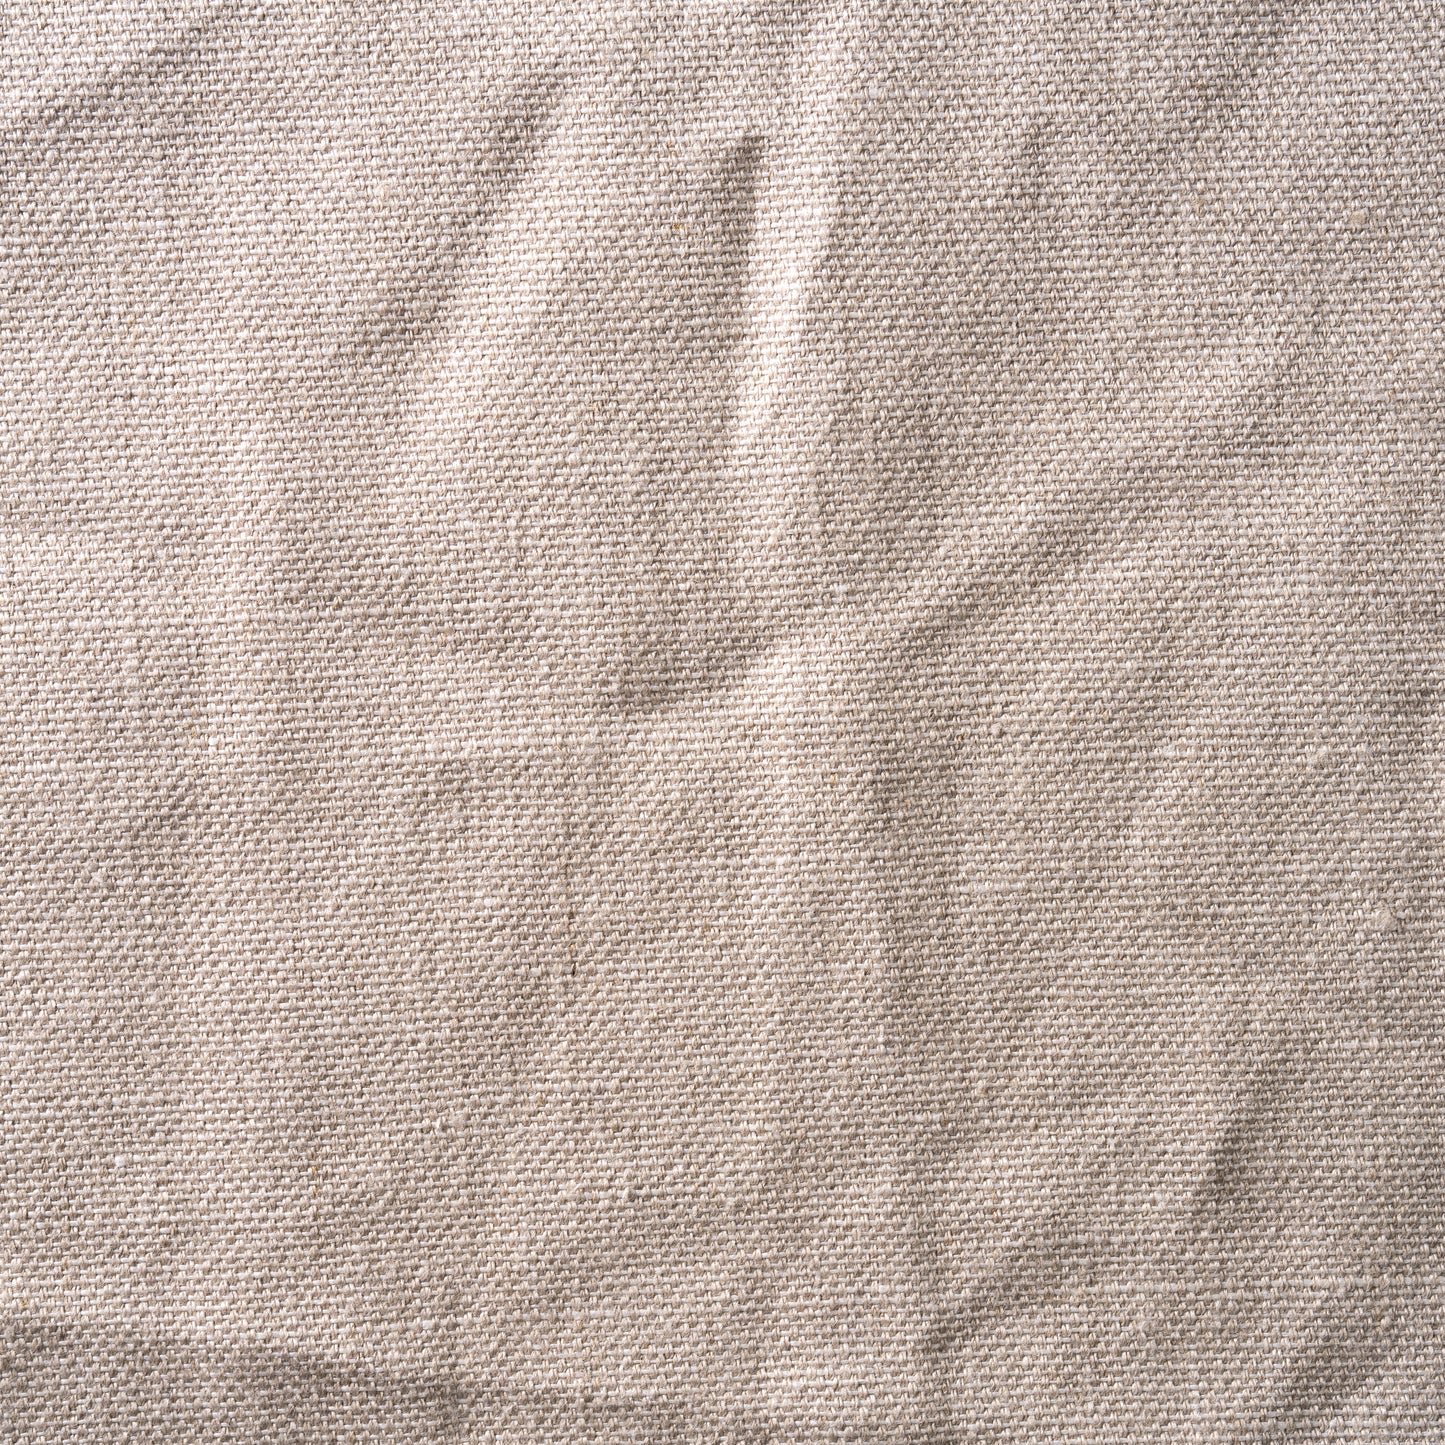 11 oz/sq yard 100% Home Furnishing Weight Linen in Mixed Natural